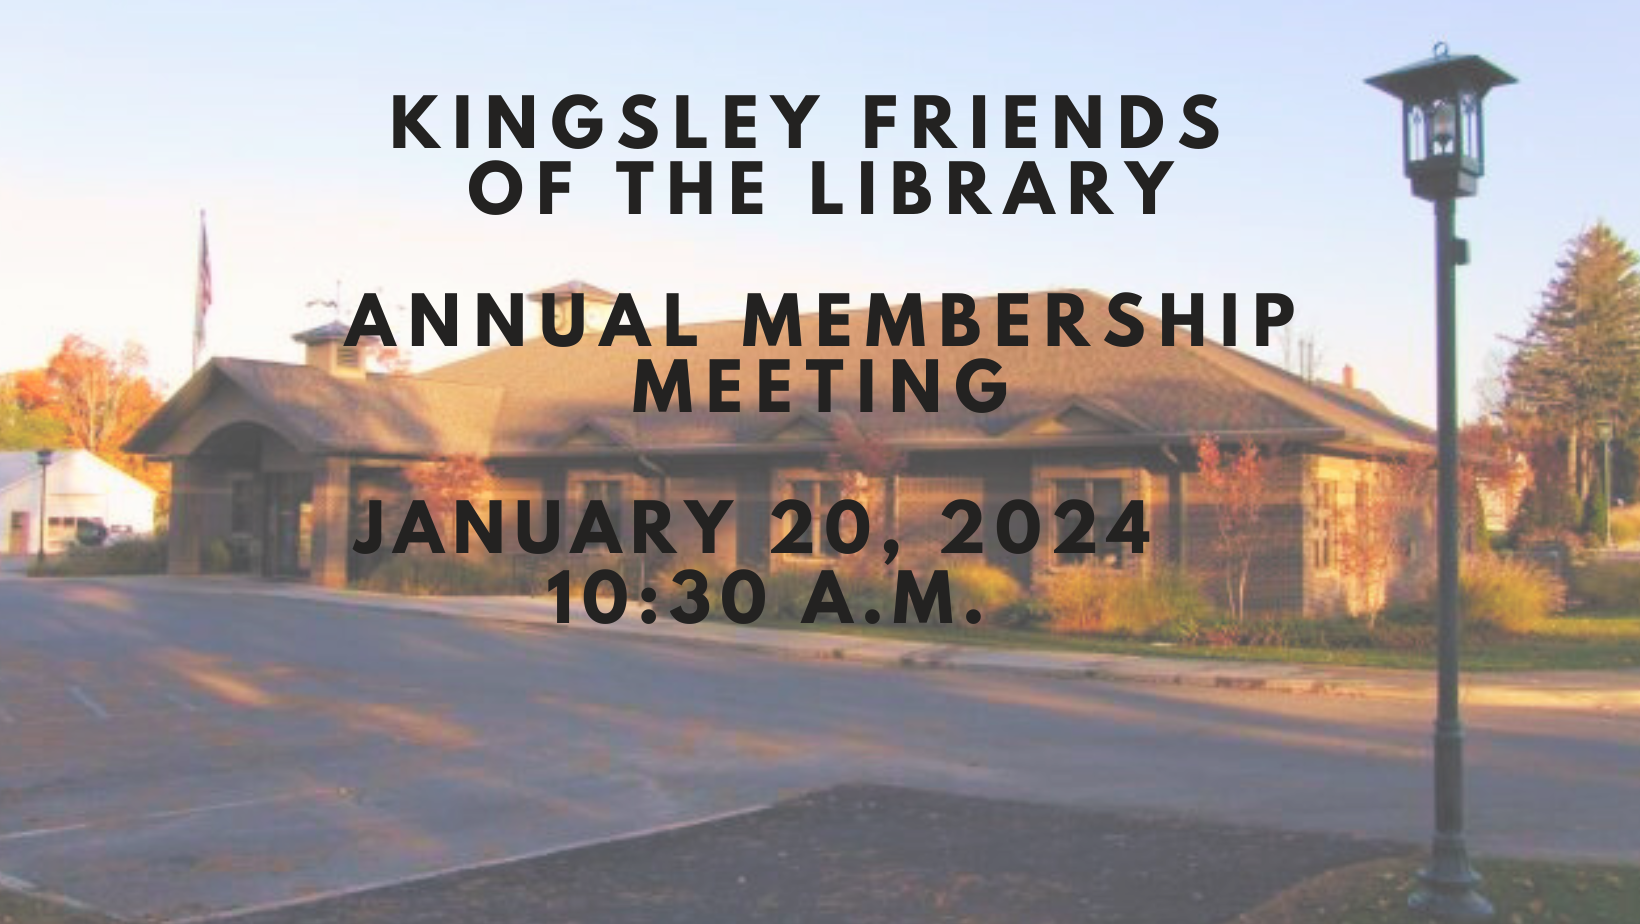 Image of the Kingsley Branch Library in the background. Foreground has text that reads "Kingsley Friends of the Library annual membership meeting on January 20, 2024 at 10:30am."